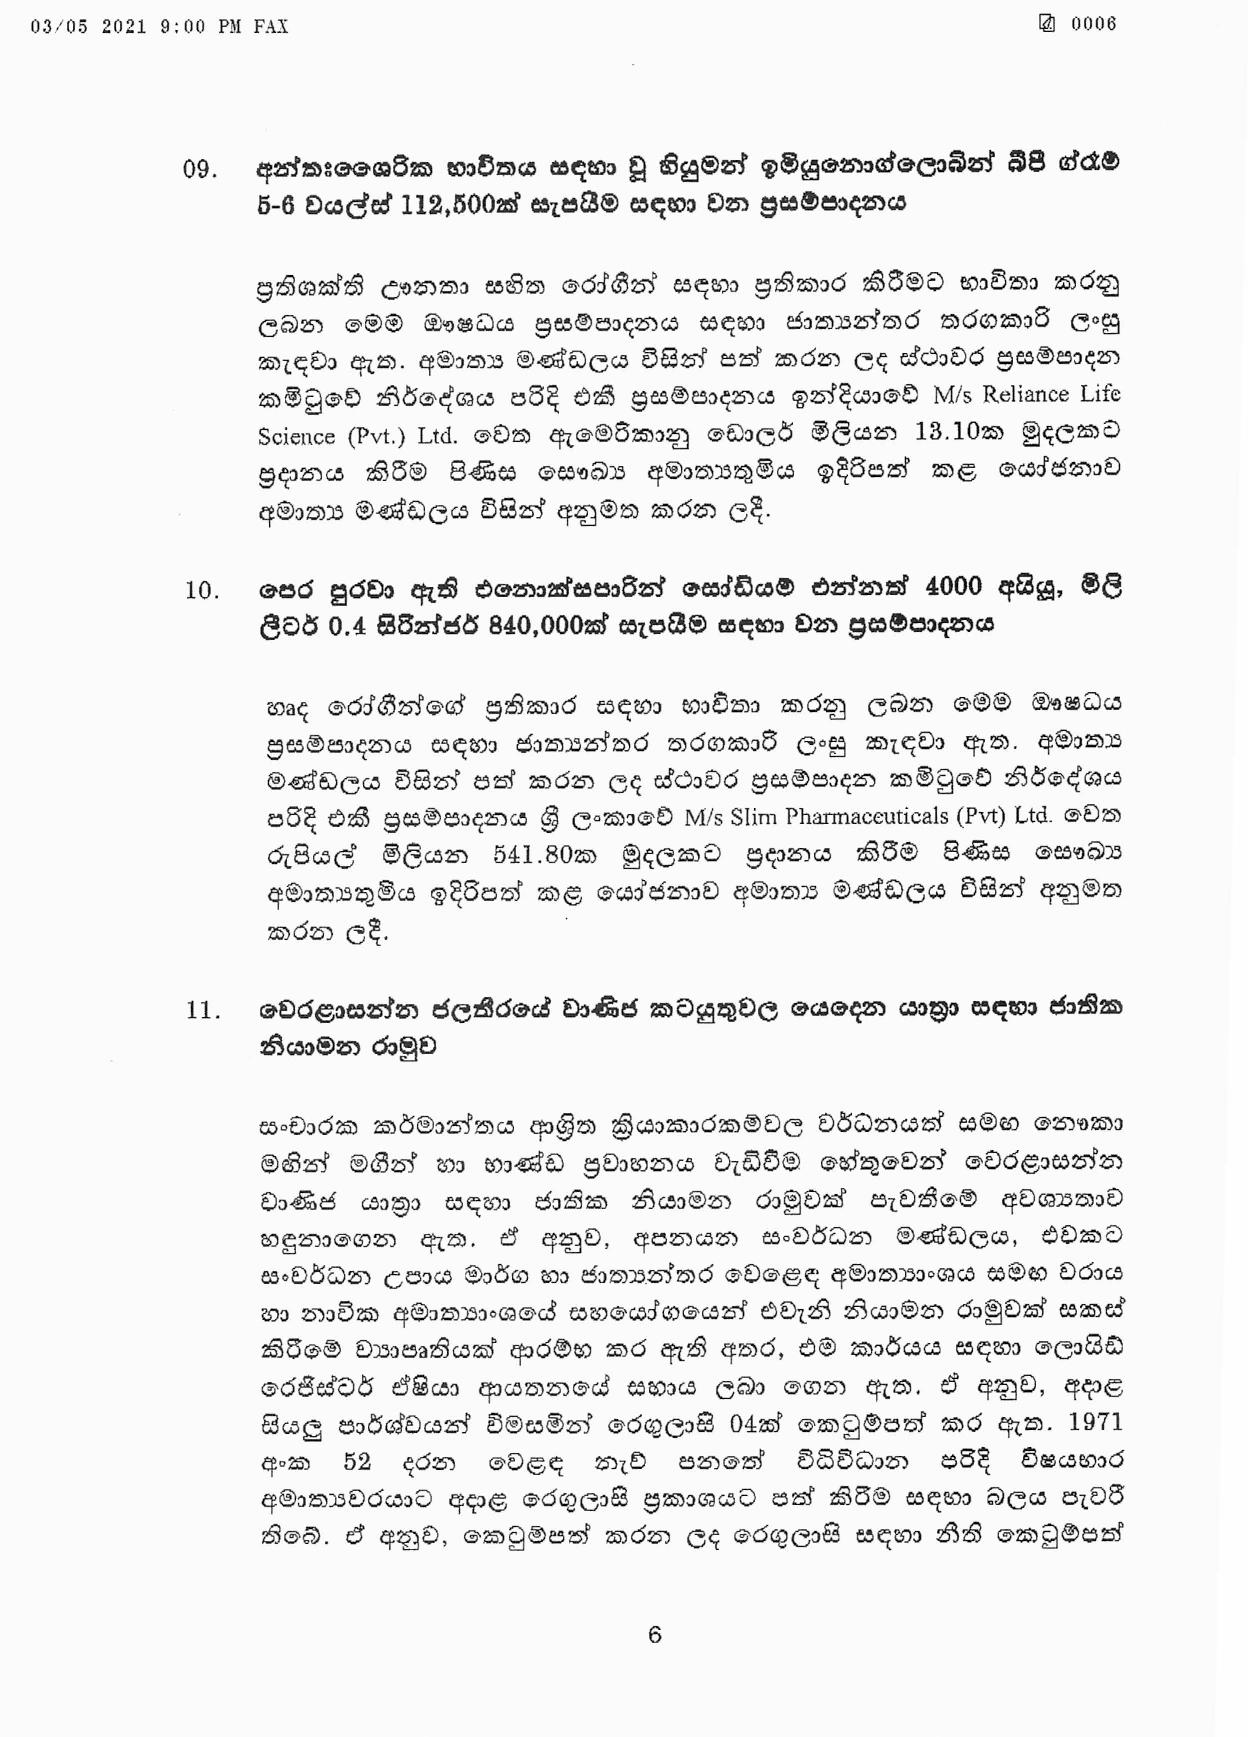 Cabinet Decision on 03.05.2021 page 006